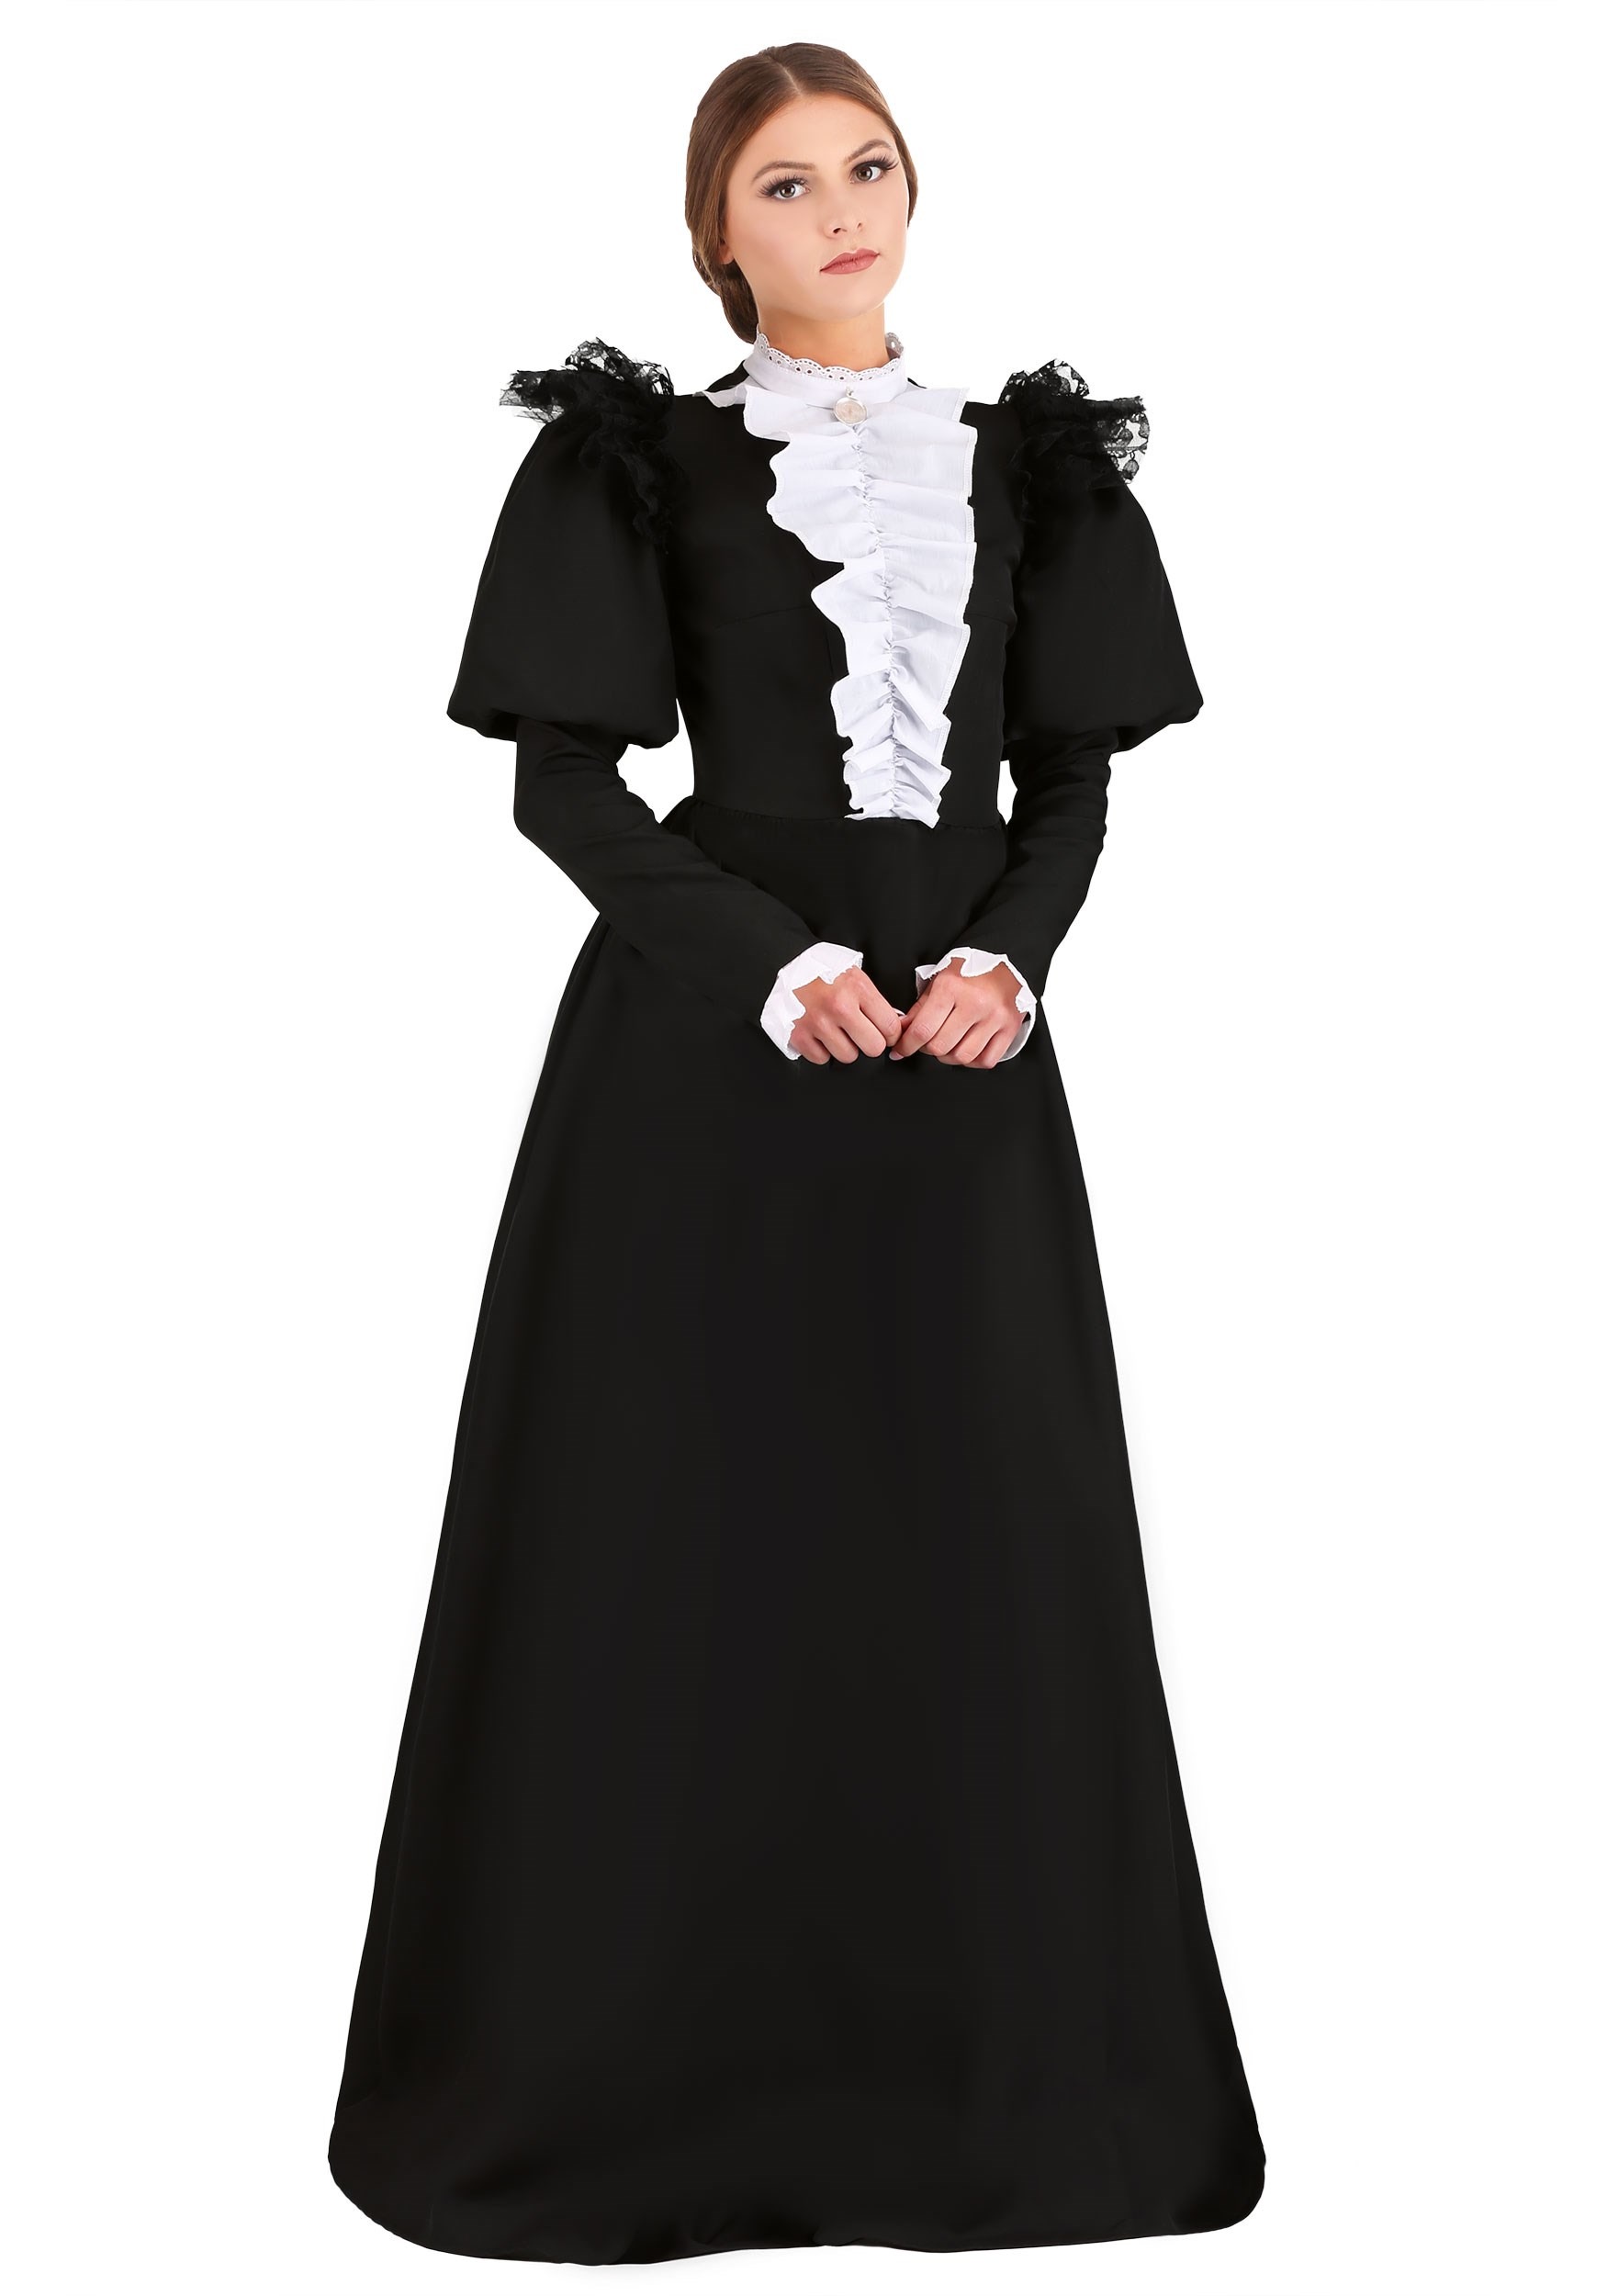 Photos - Fancy Dress Anthony FUN Costumes Susan B.   Costume for Women Black/Whit 